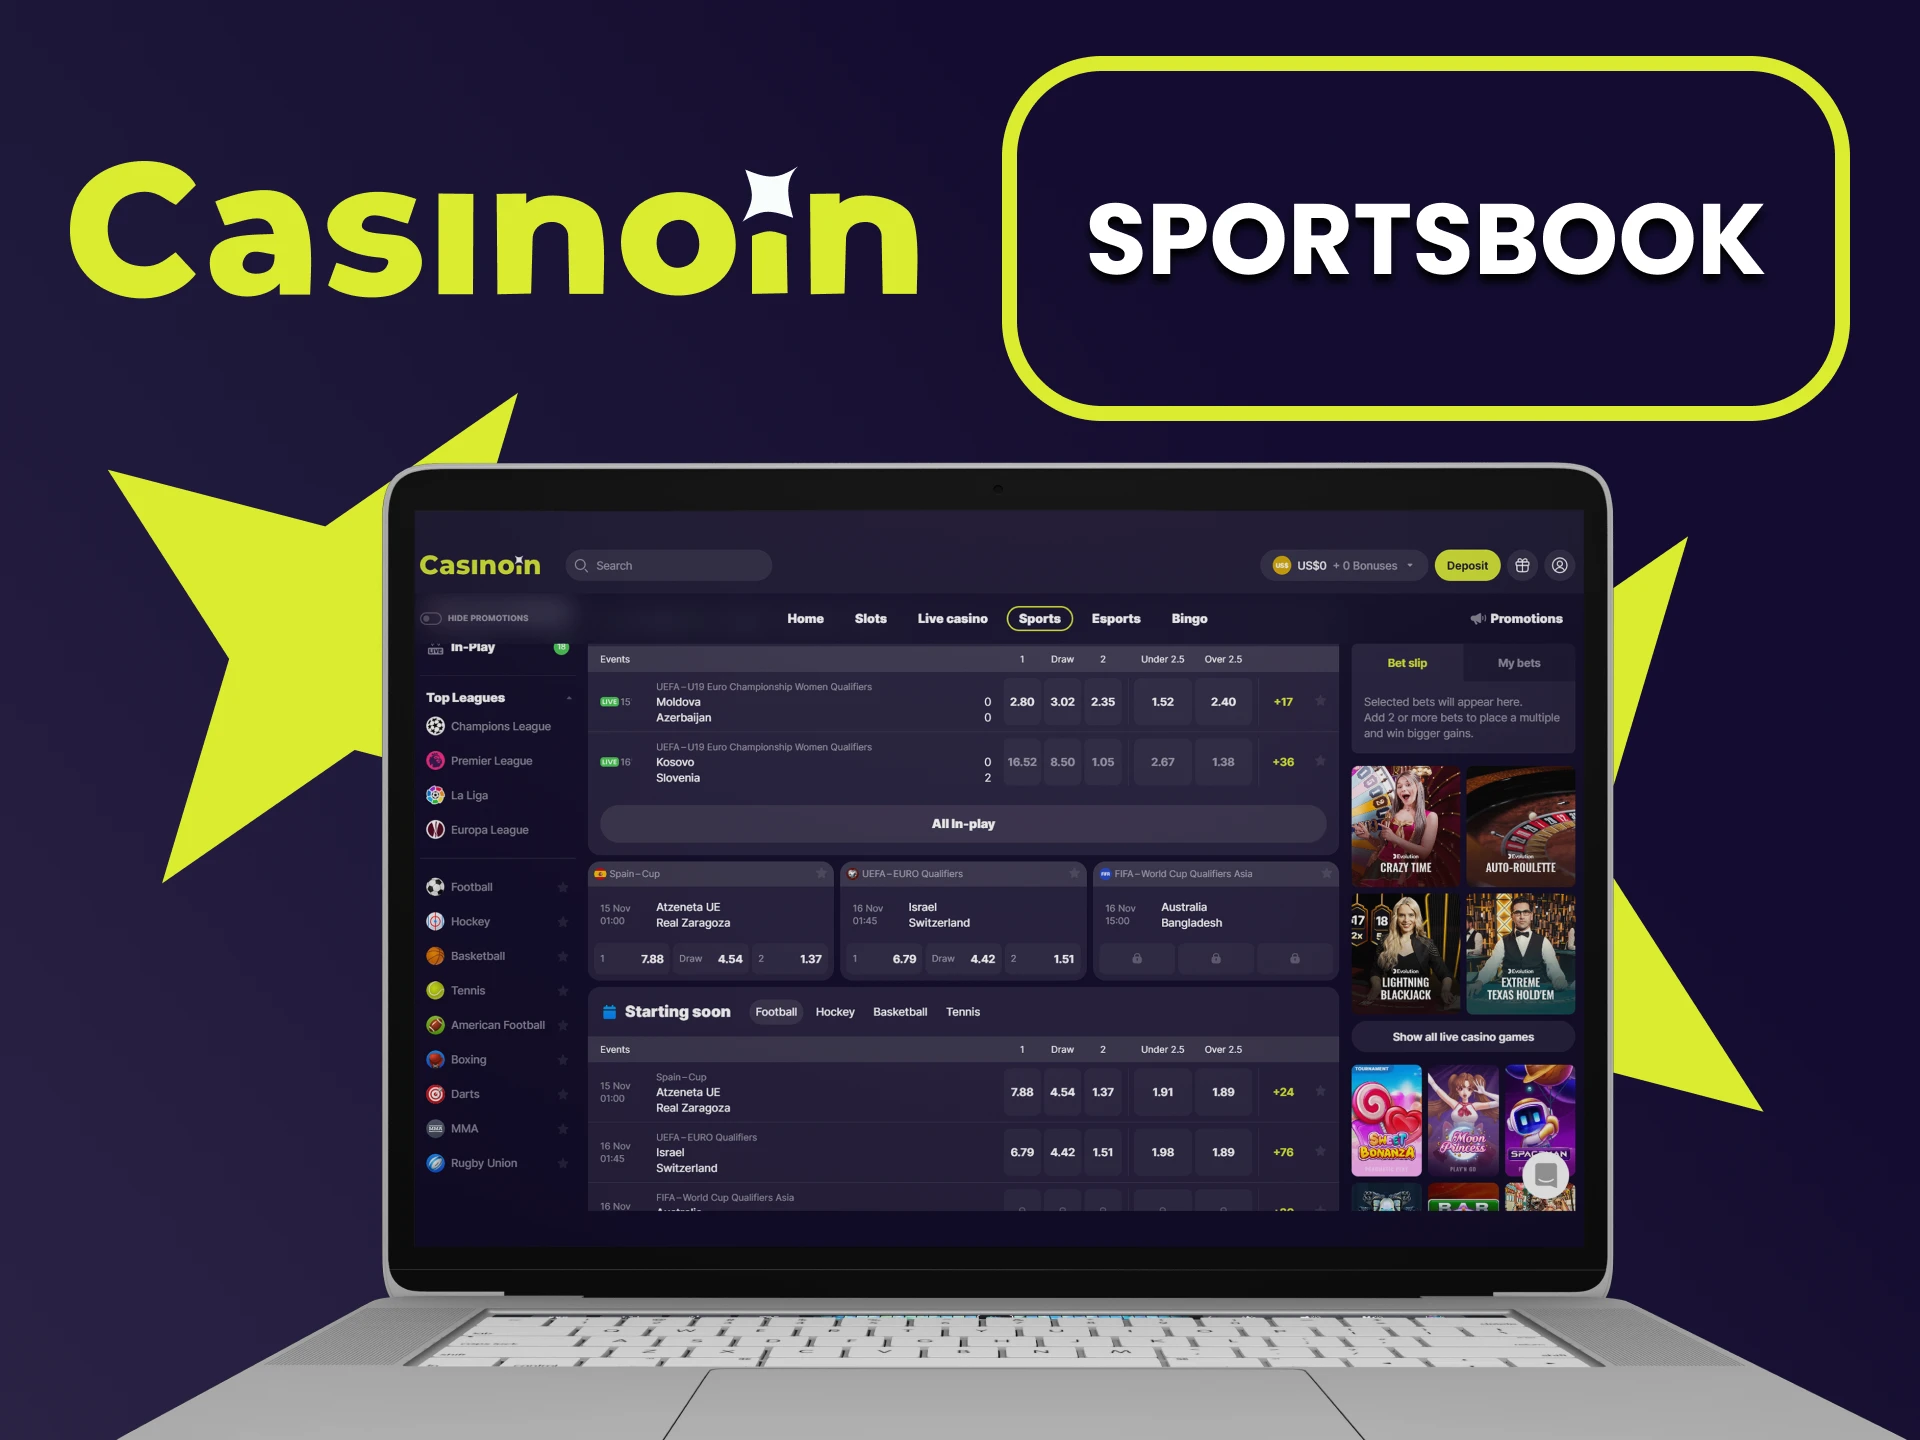 You can bet on sports with Casinoin.